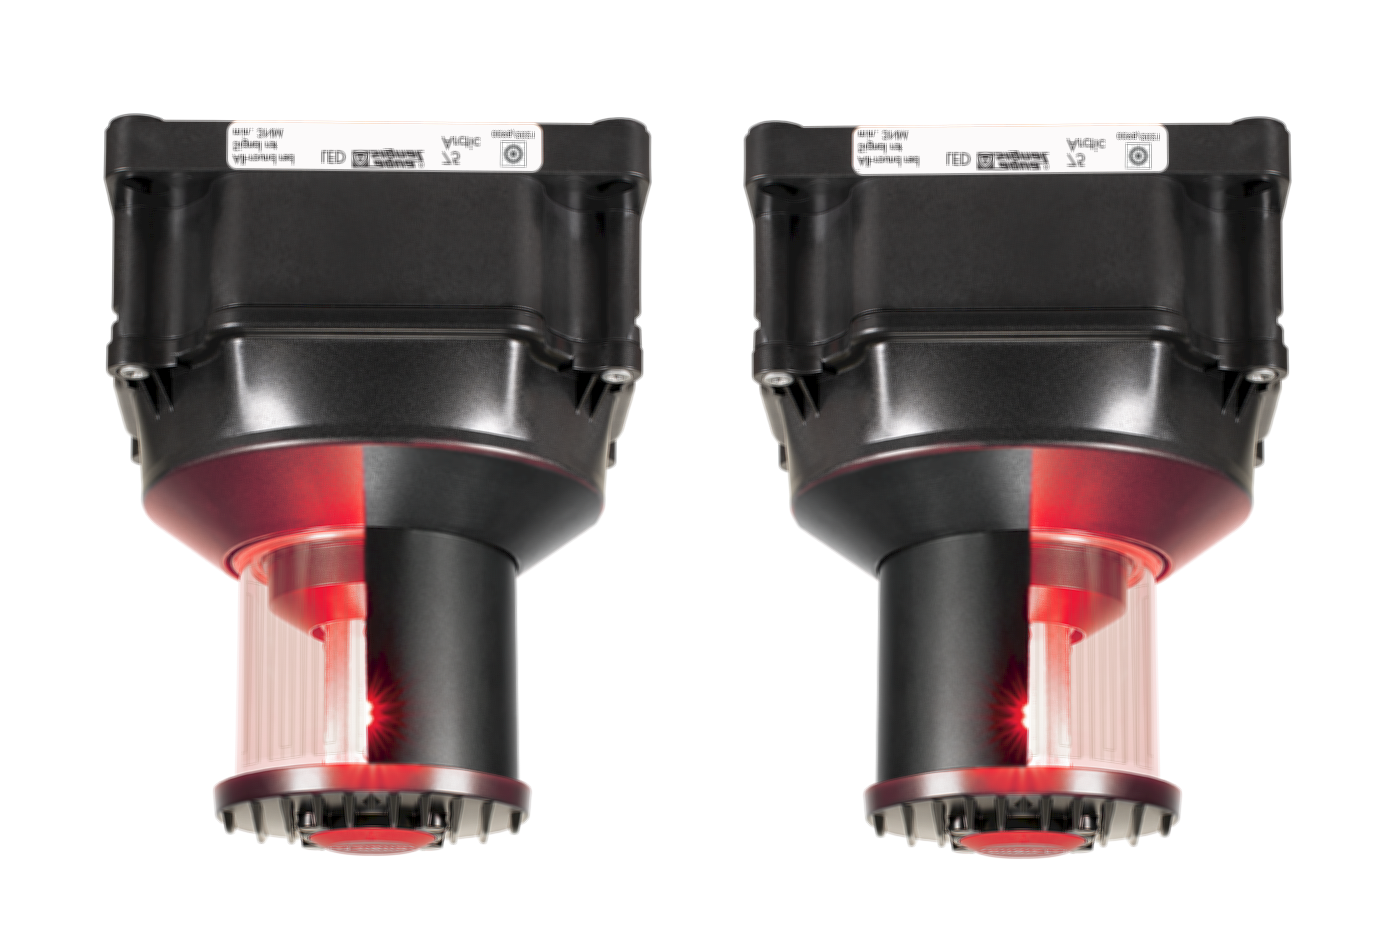 75 ARCTIC LED A/R RED UPSIDE DOWN (2X180&#176;) STB+PORT 115-230VAC